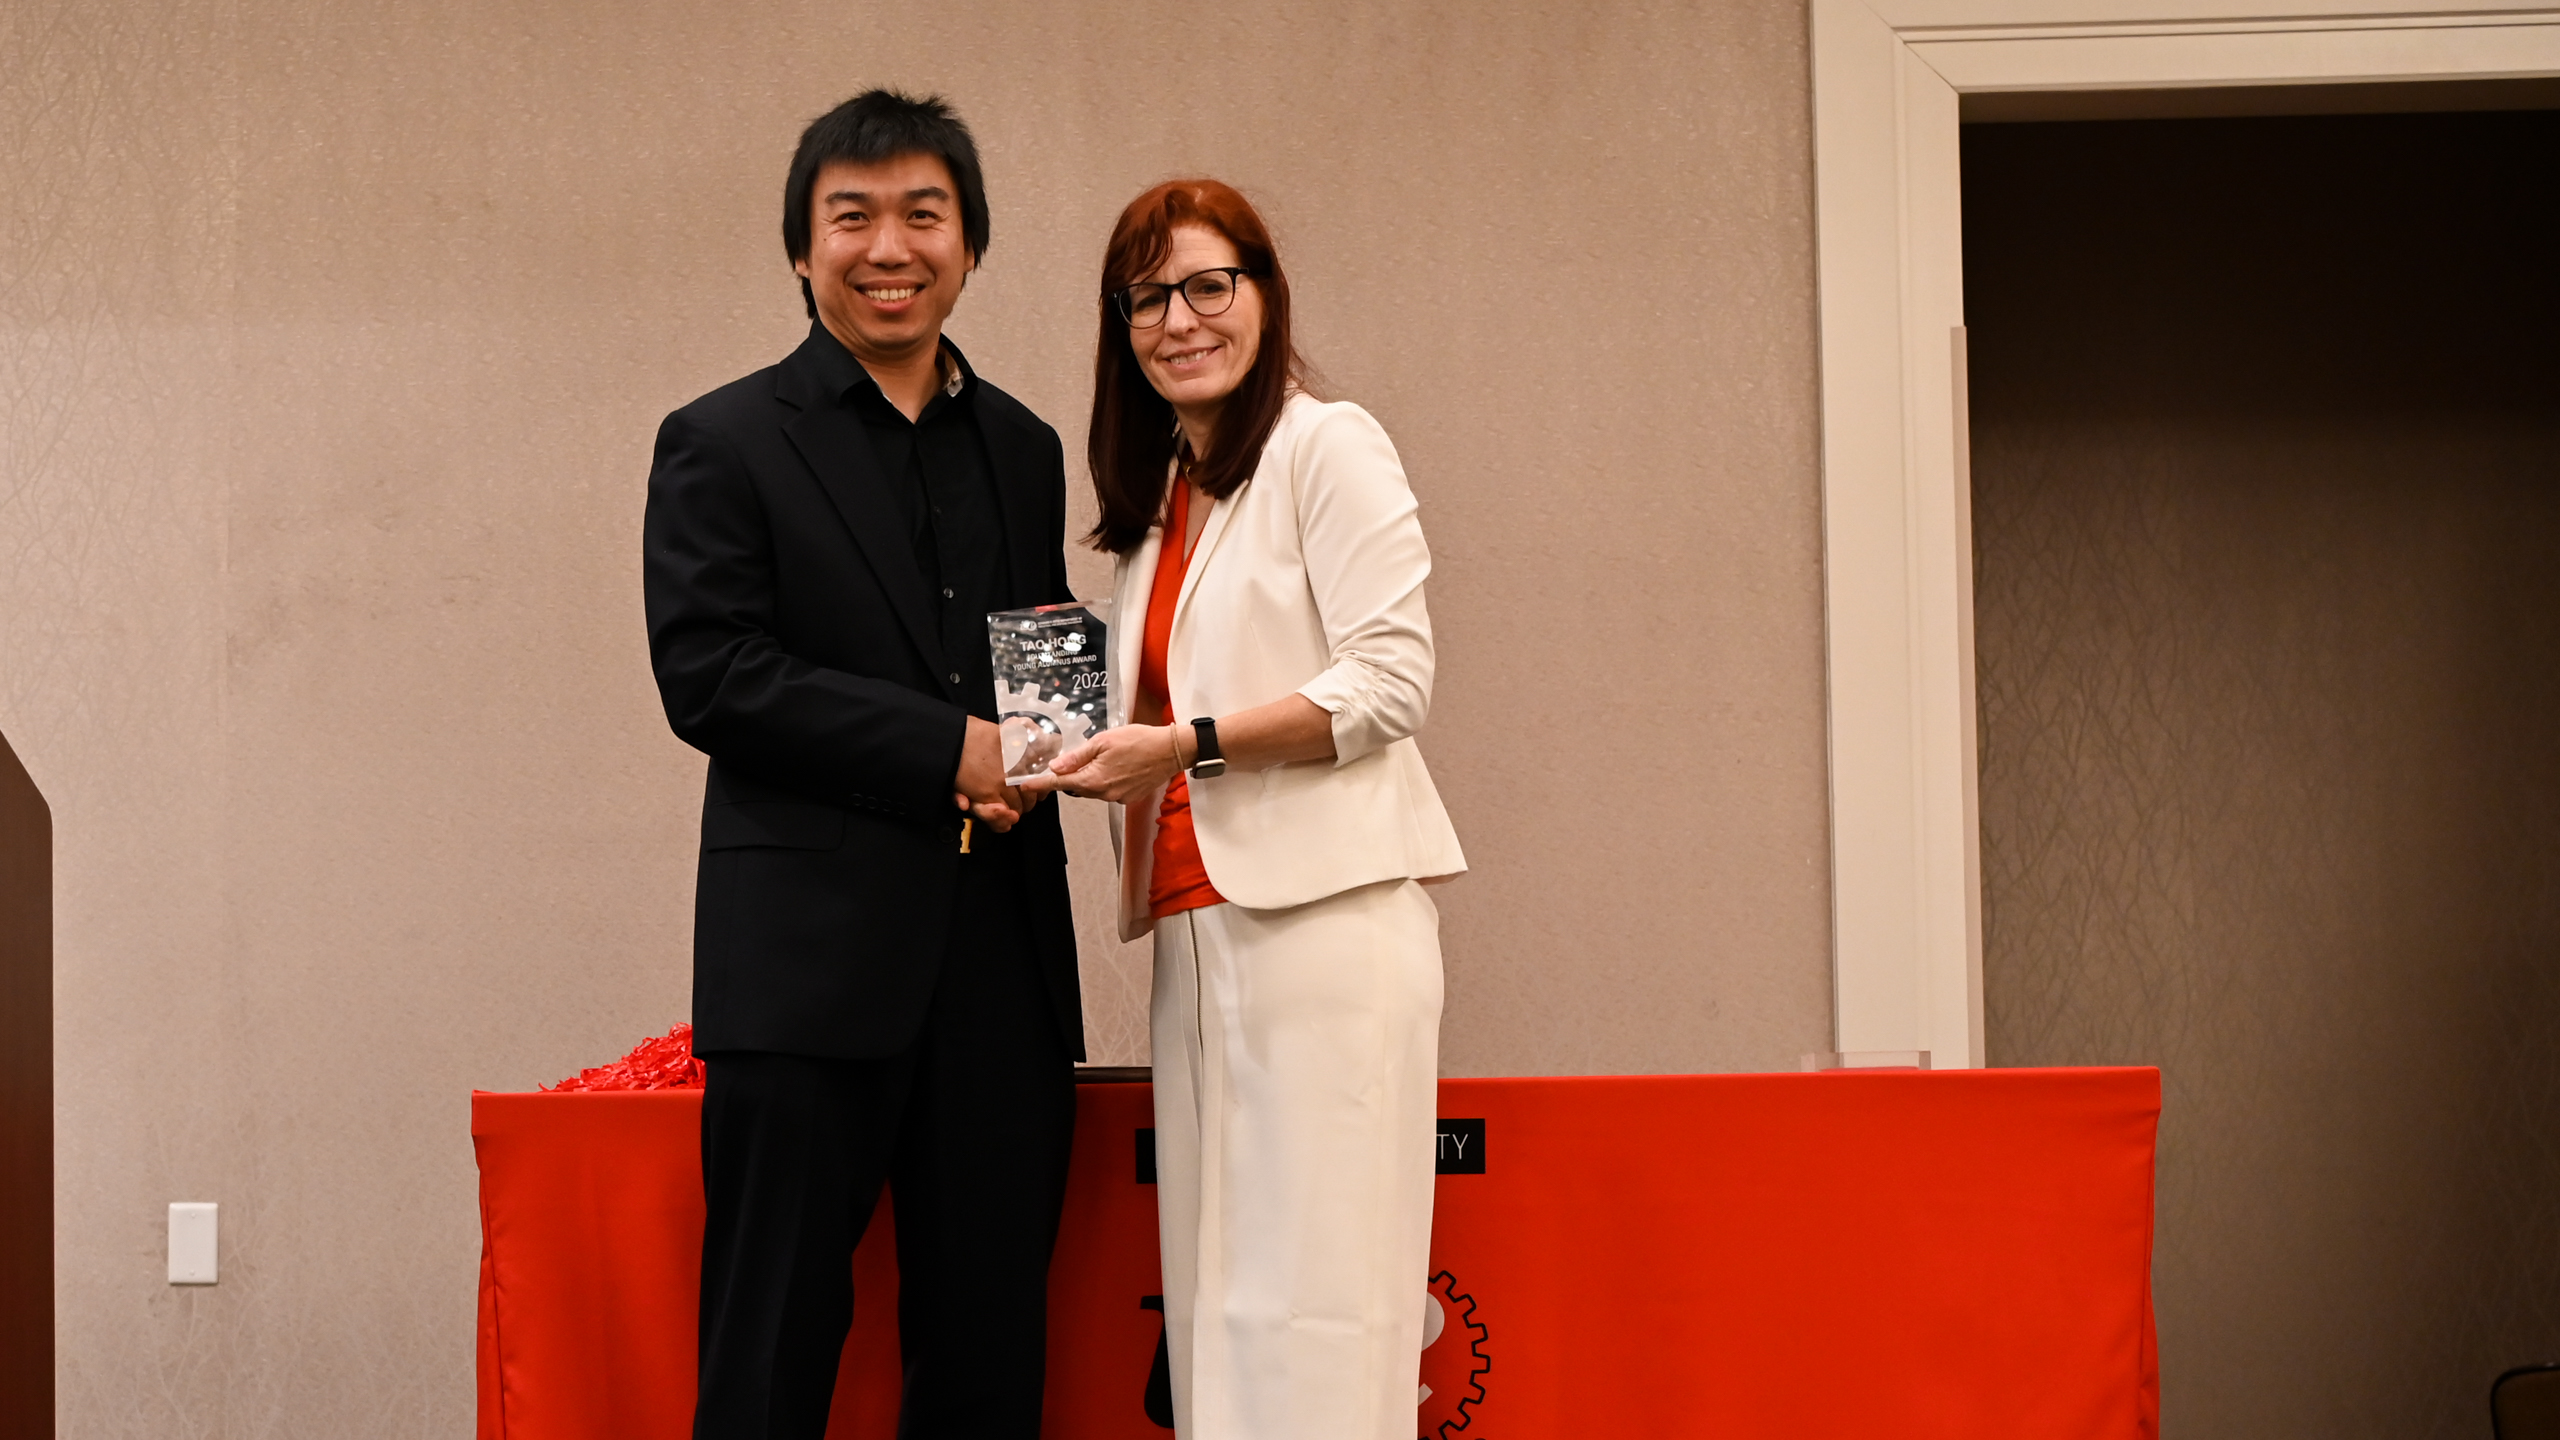 Outstanding Young Alumnus Dr. Tao Hong accepting his award from Dr. Julie Swann